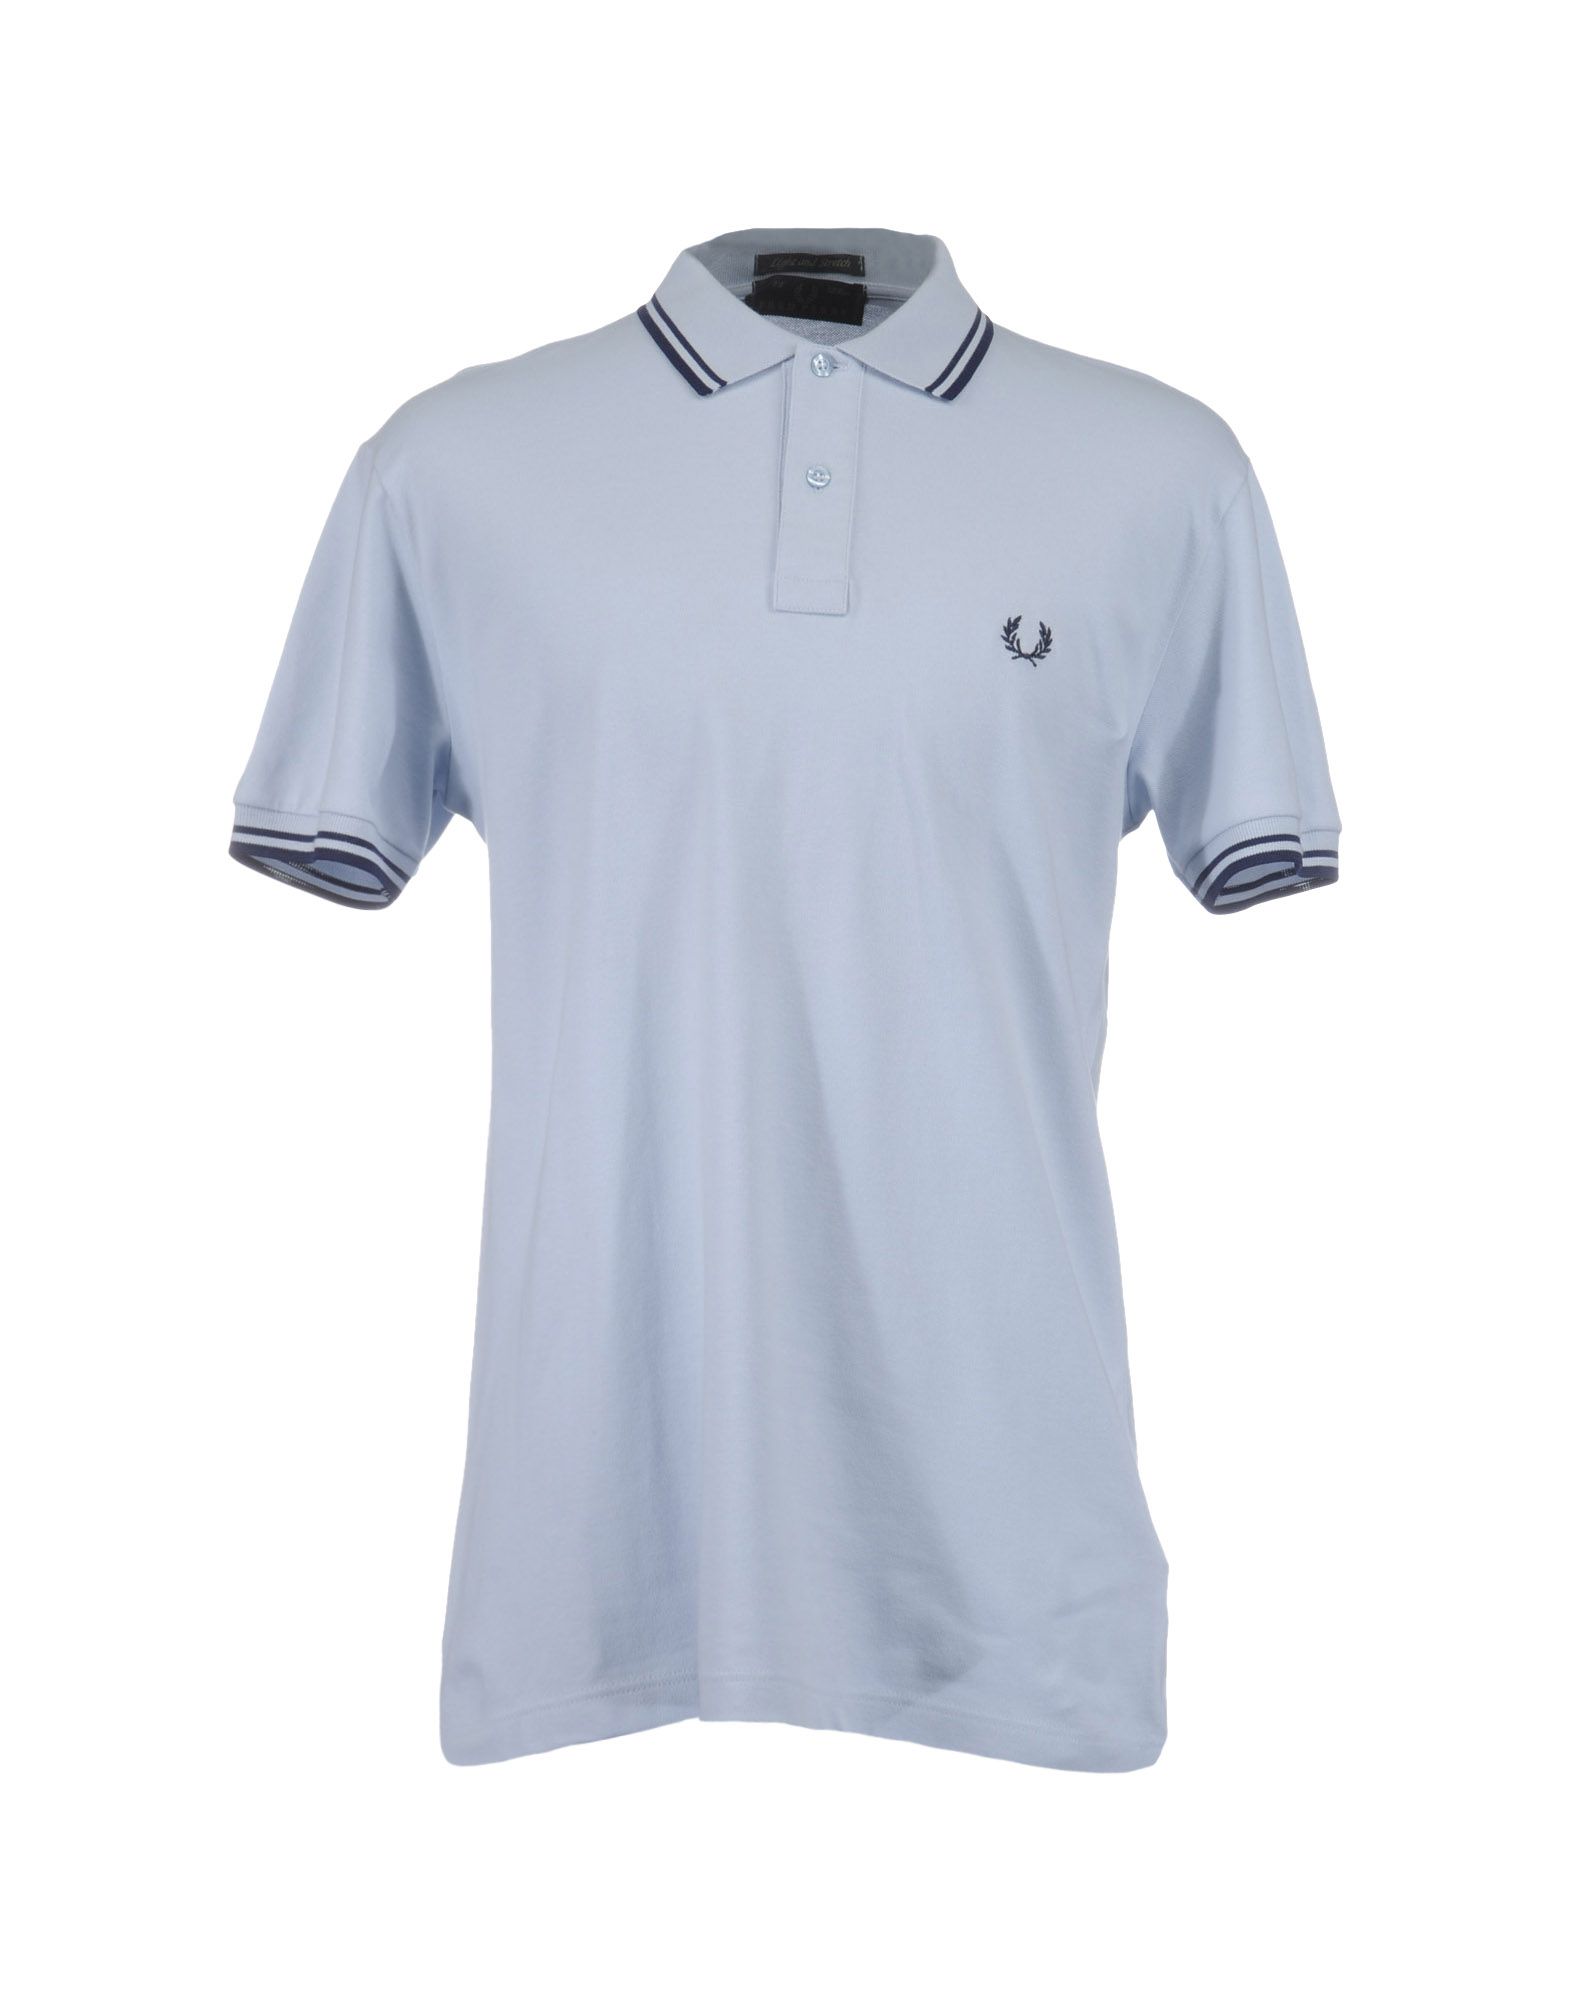 Foto fred perry polos
 foto 321539